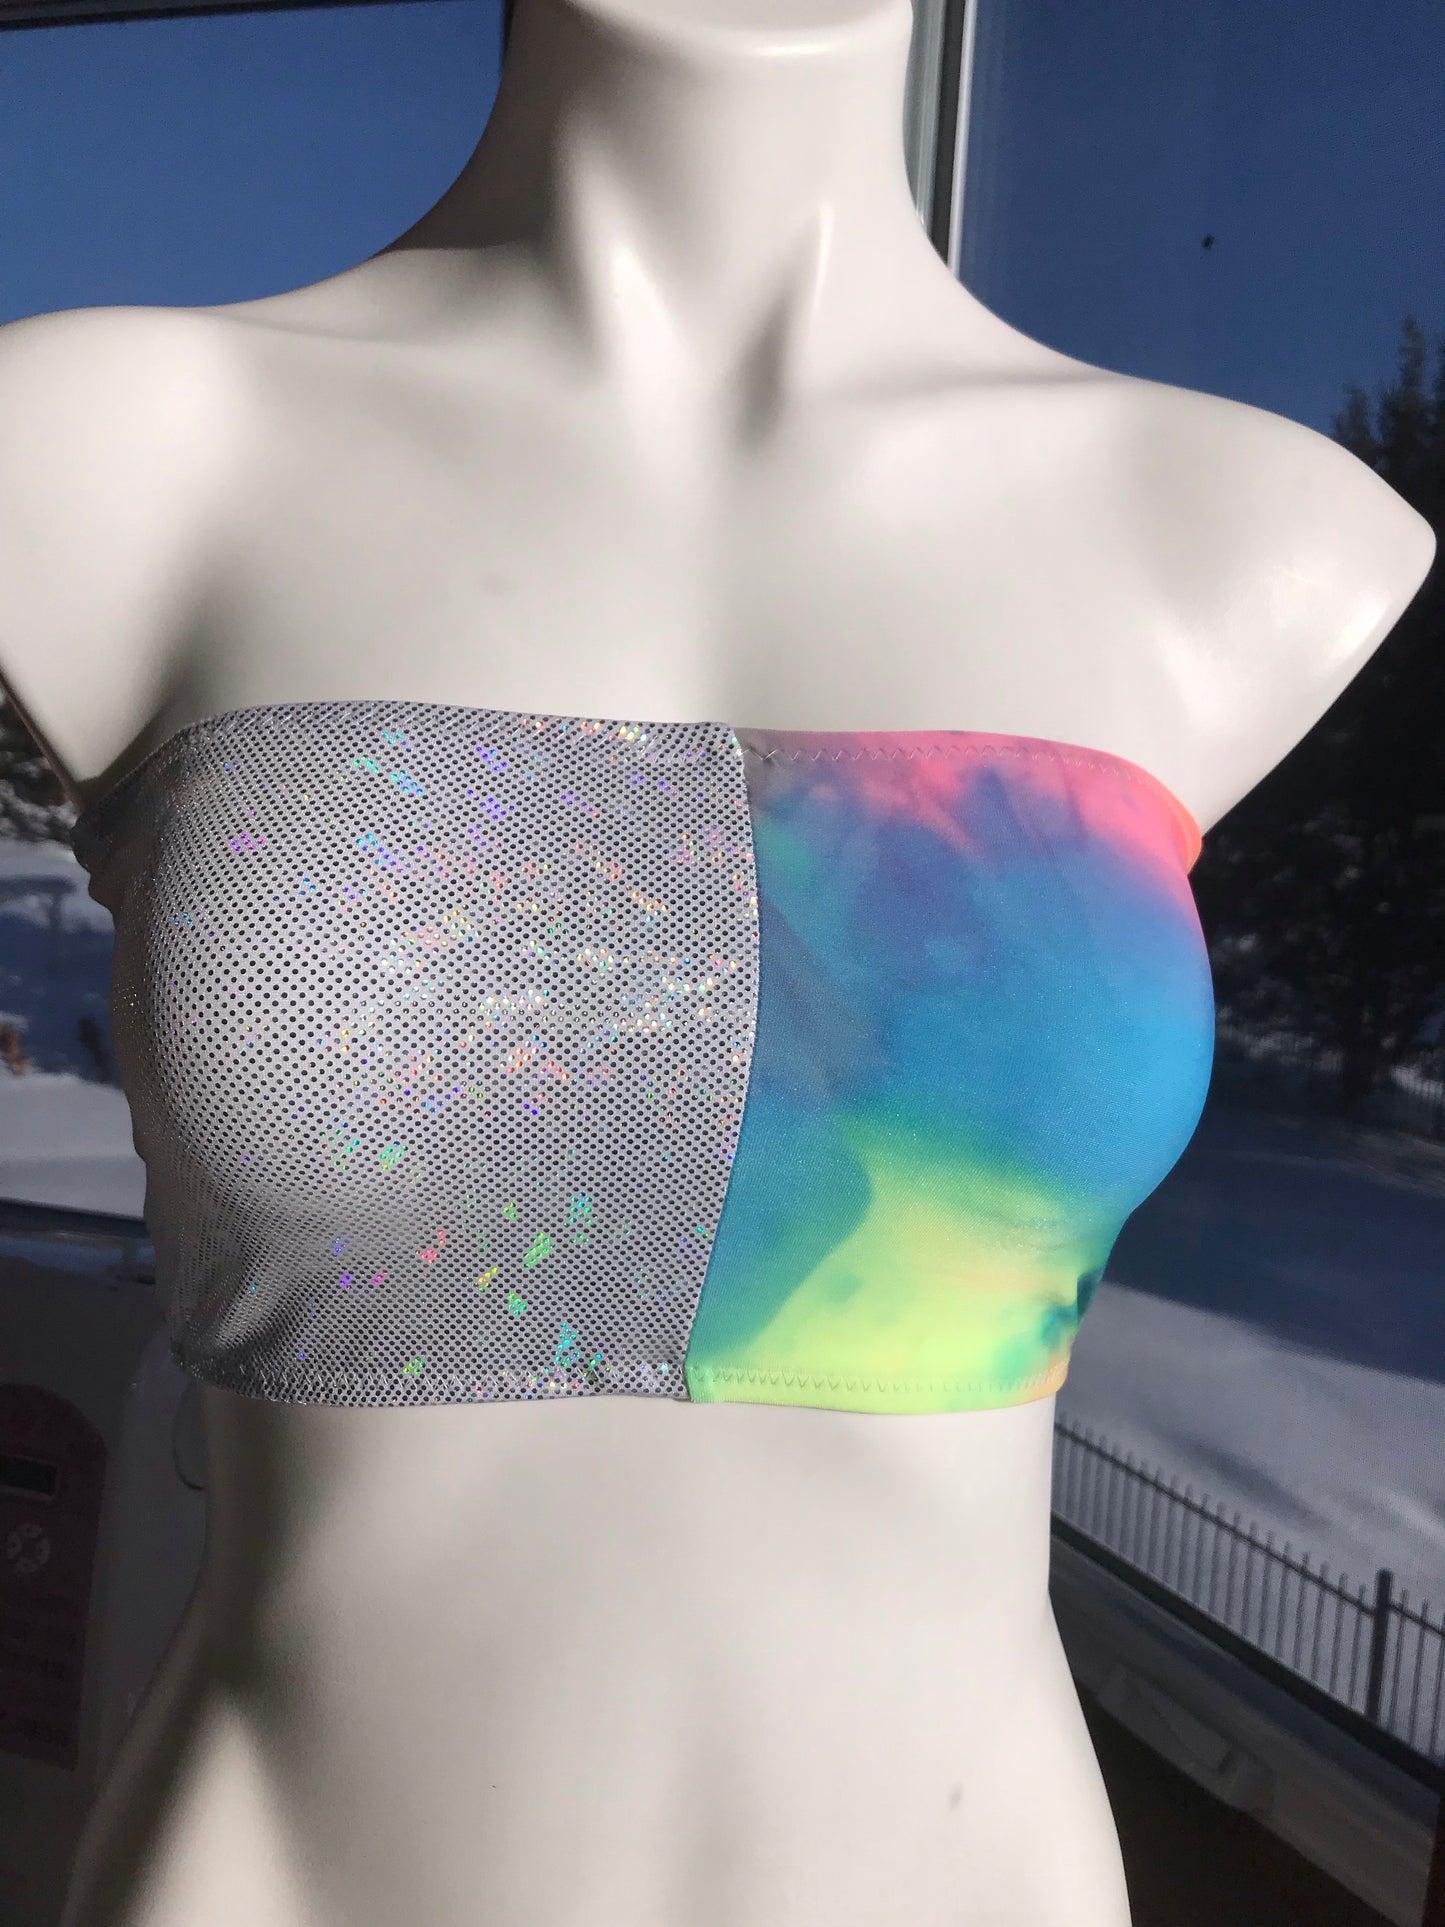 Size XS-SMALL - Tie Dye and white holo boob Tube Top, Festival Top, holographic top, burning man, edc clothing, rave crop top - Electric Couture Dolls